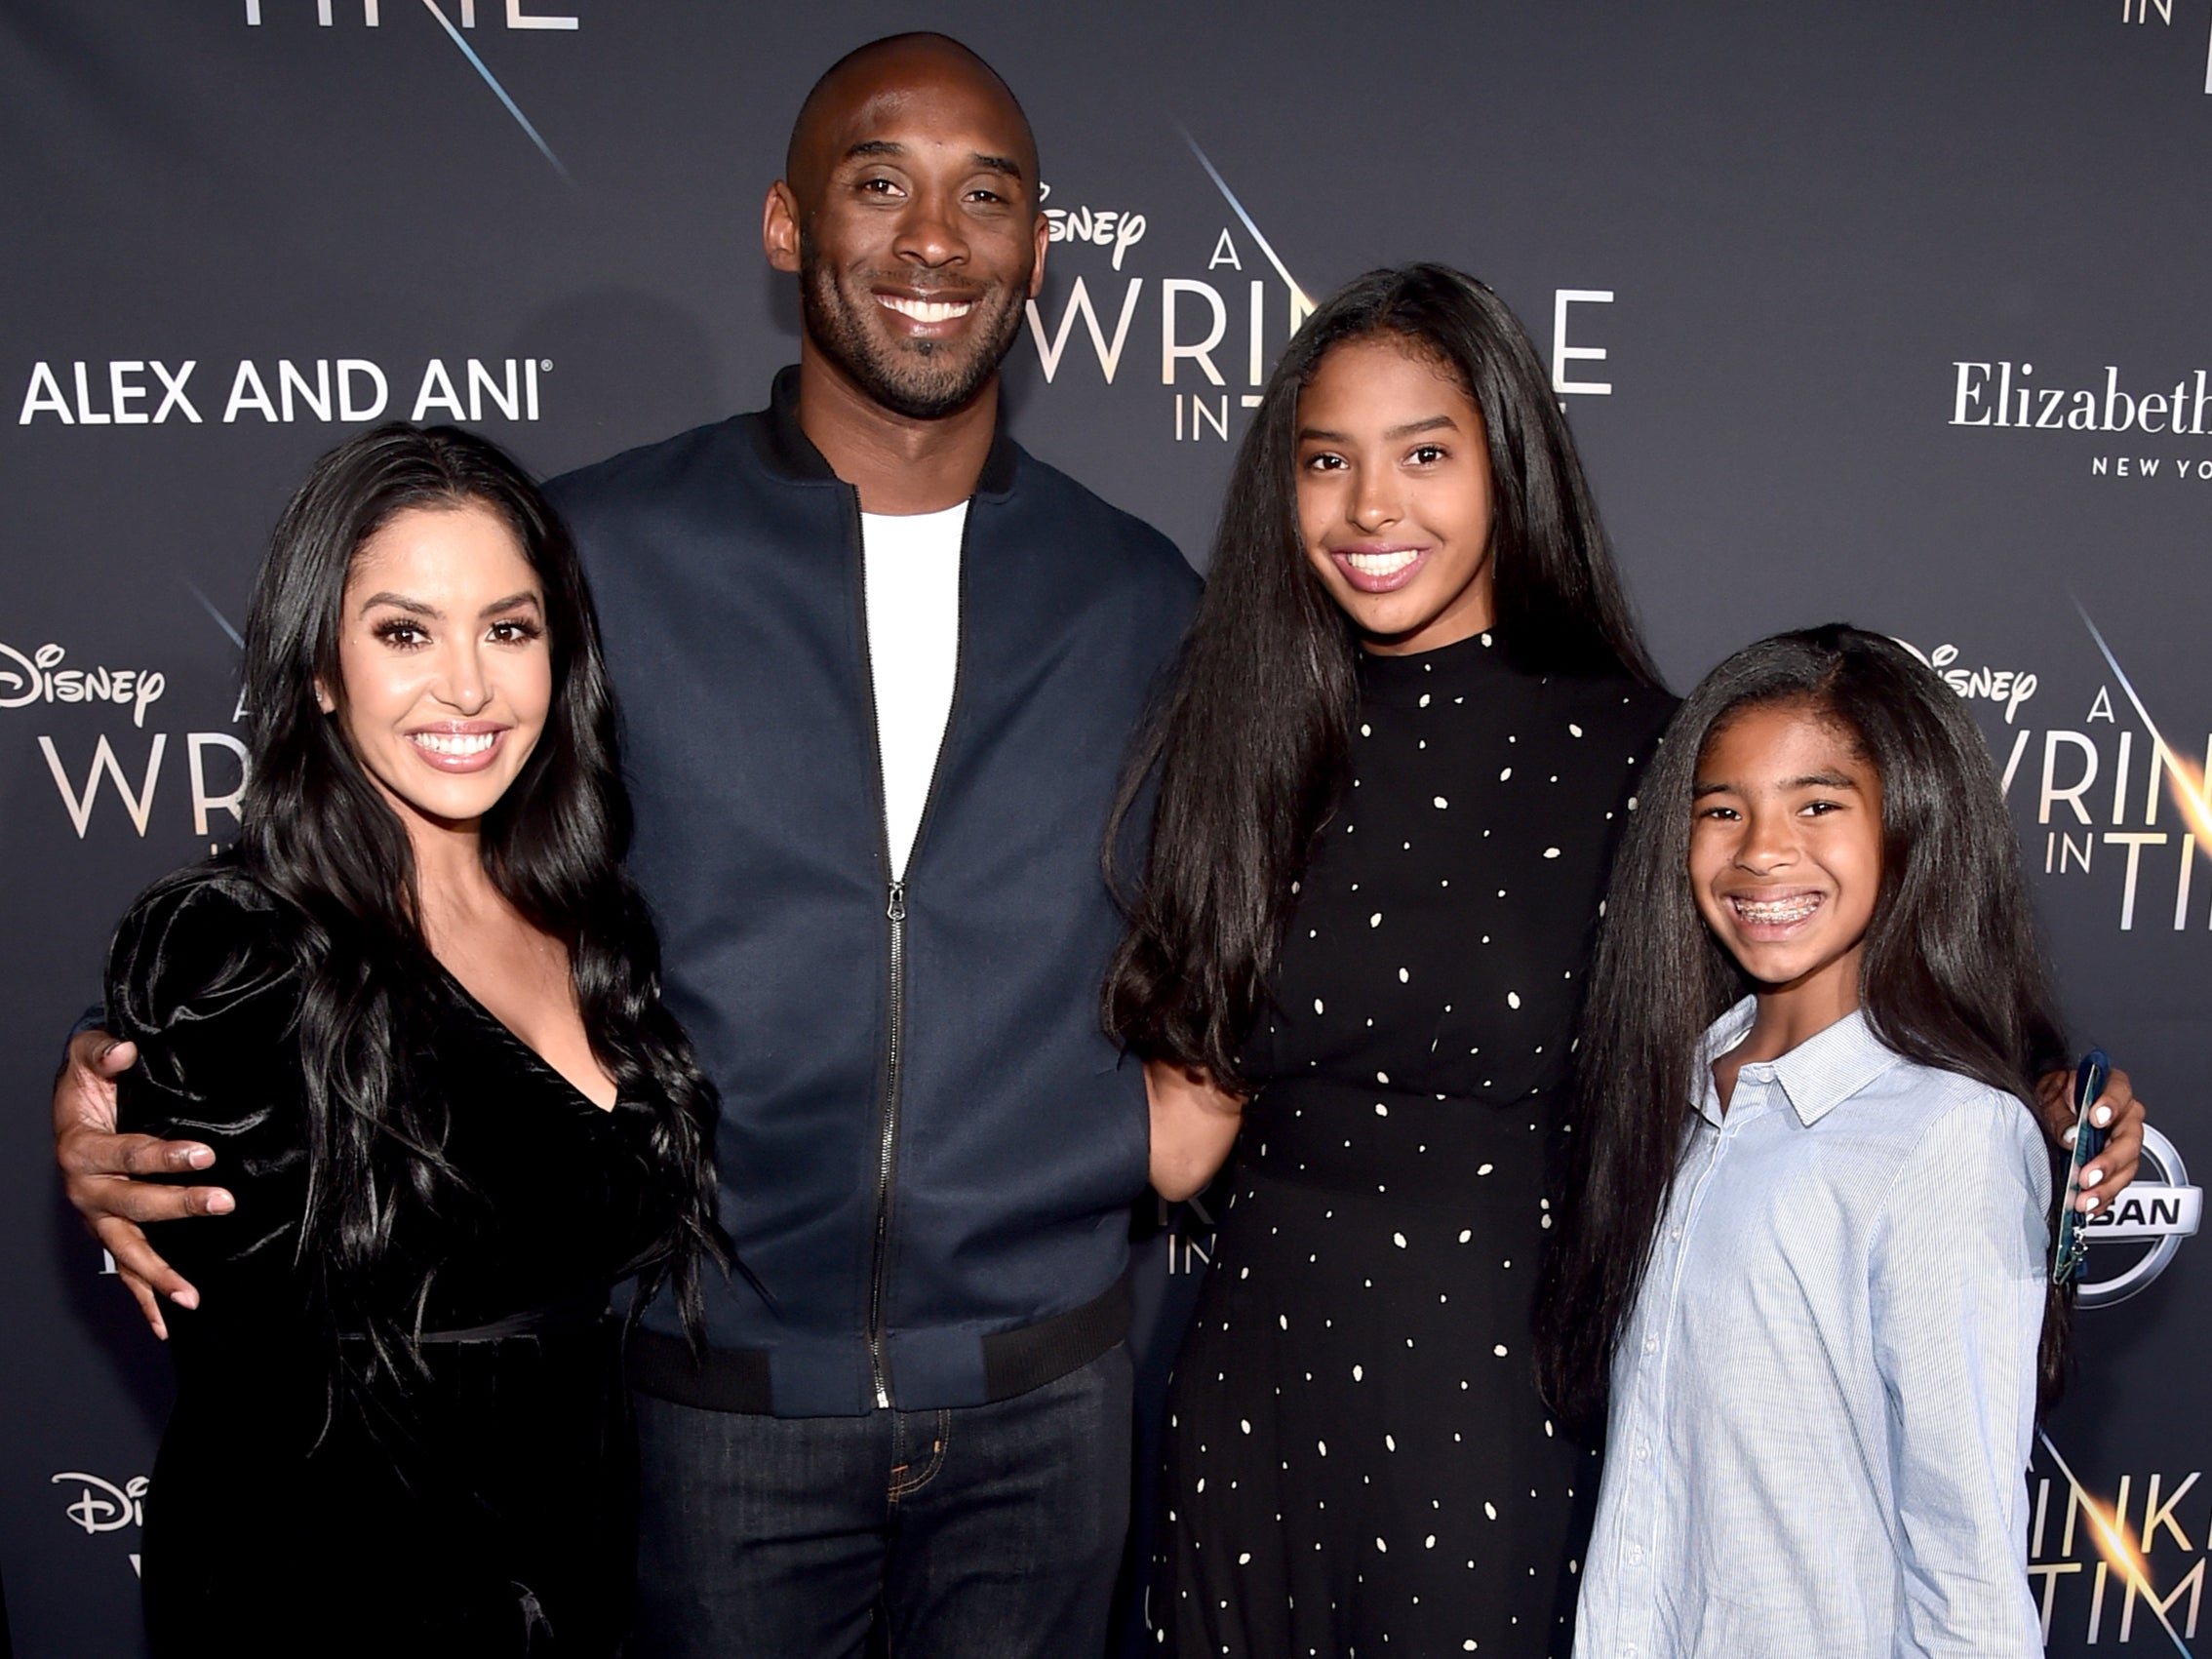 Vanessa Bryant shares tribute to Kobe and Gianna on first anniversary of  their deaths: 'Kob, we did it right